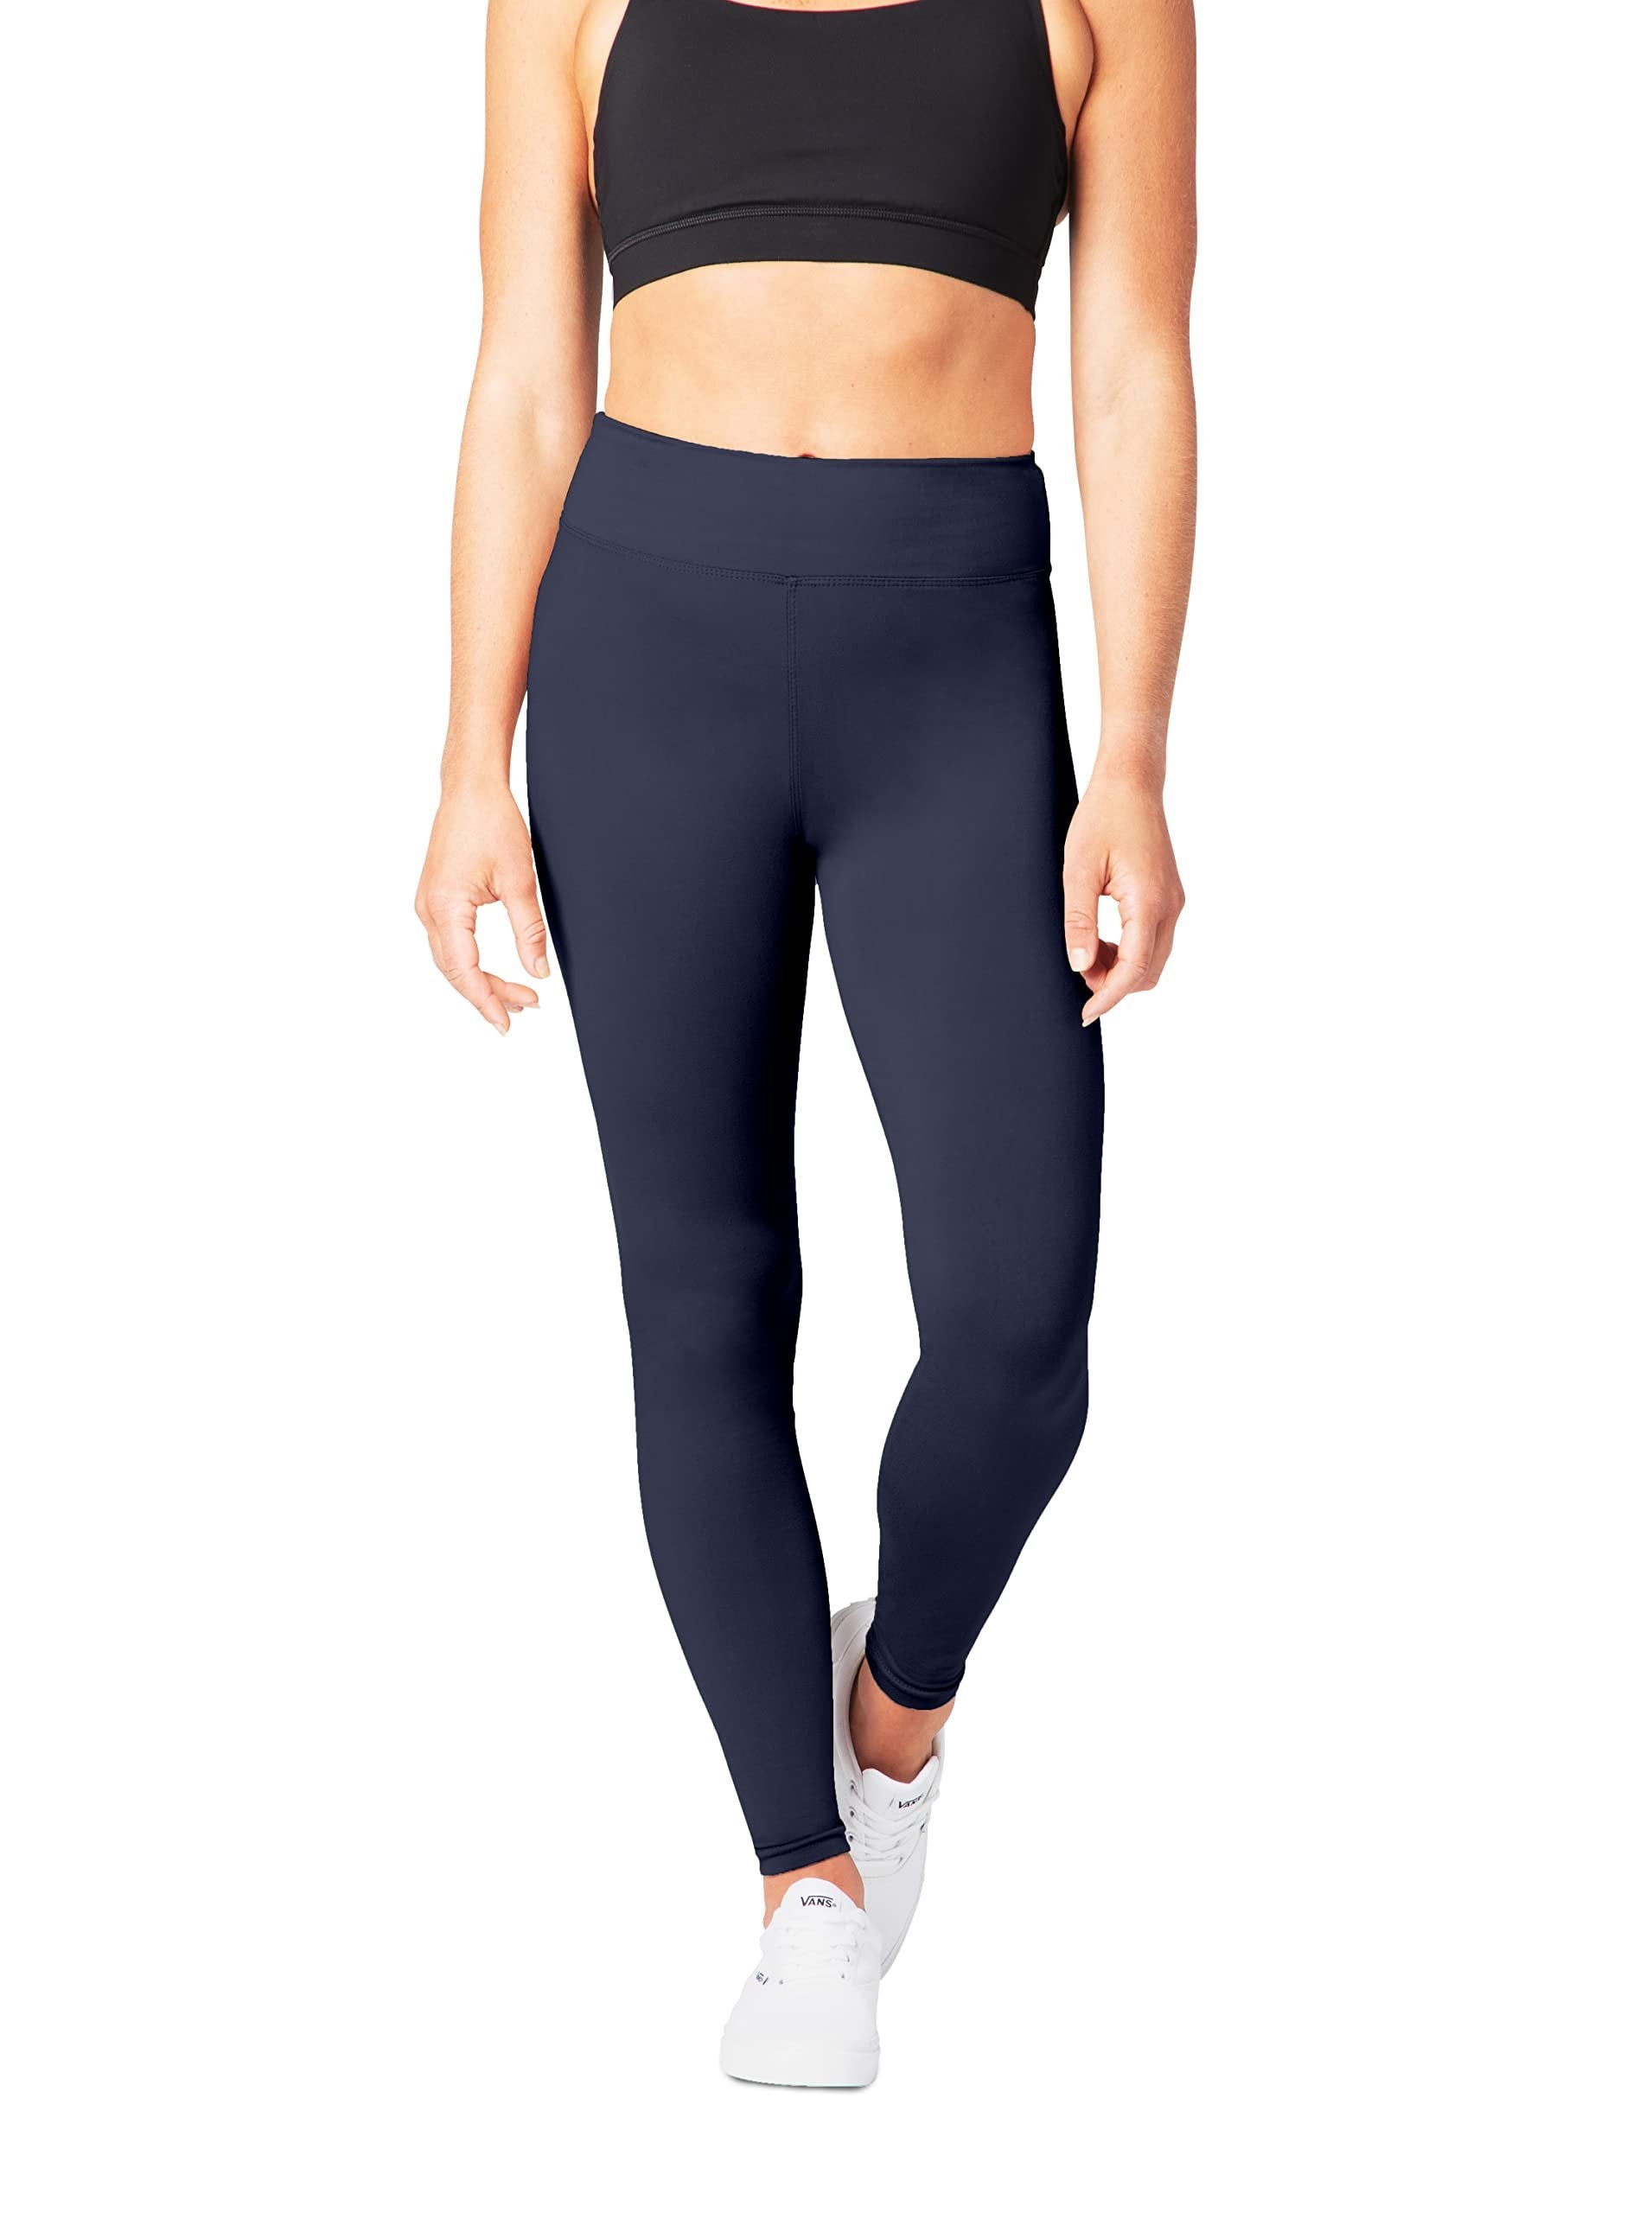 New SATINA Tan High Waisted Leggings for Women | 3 Inch Waistband | Plus  Size